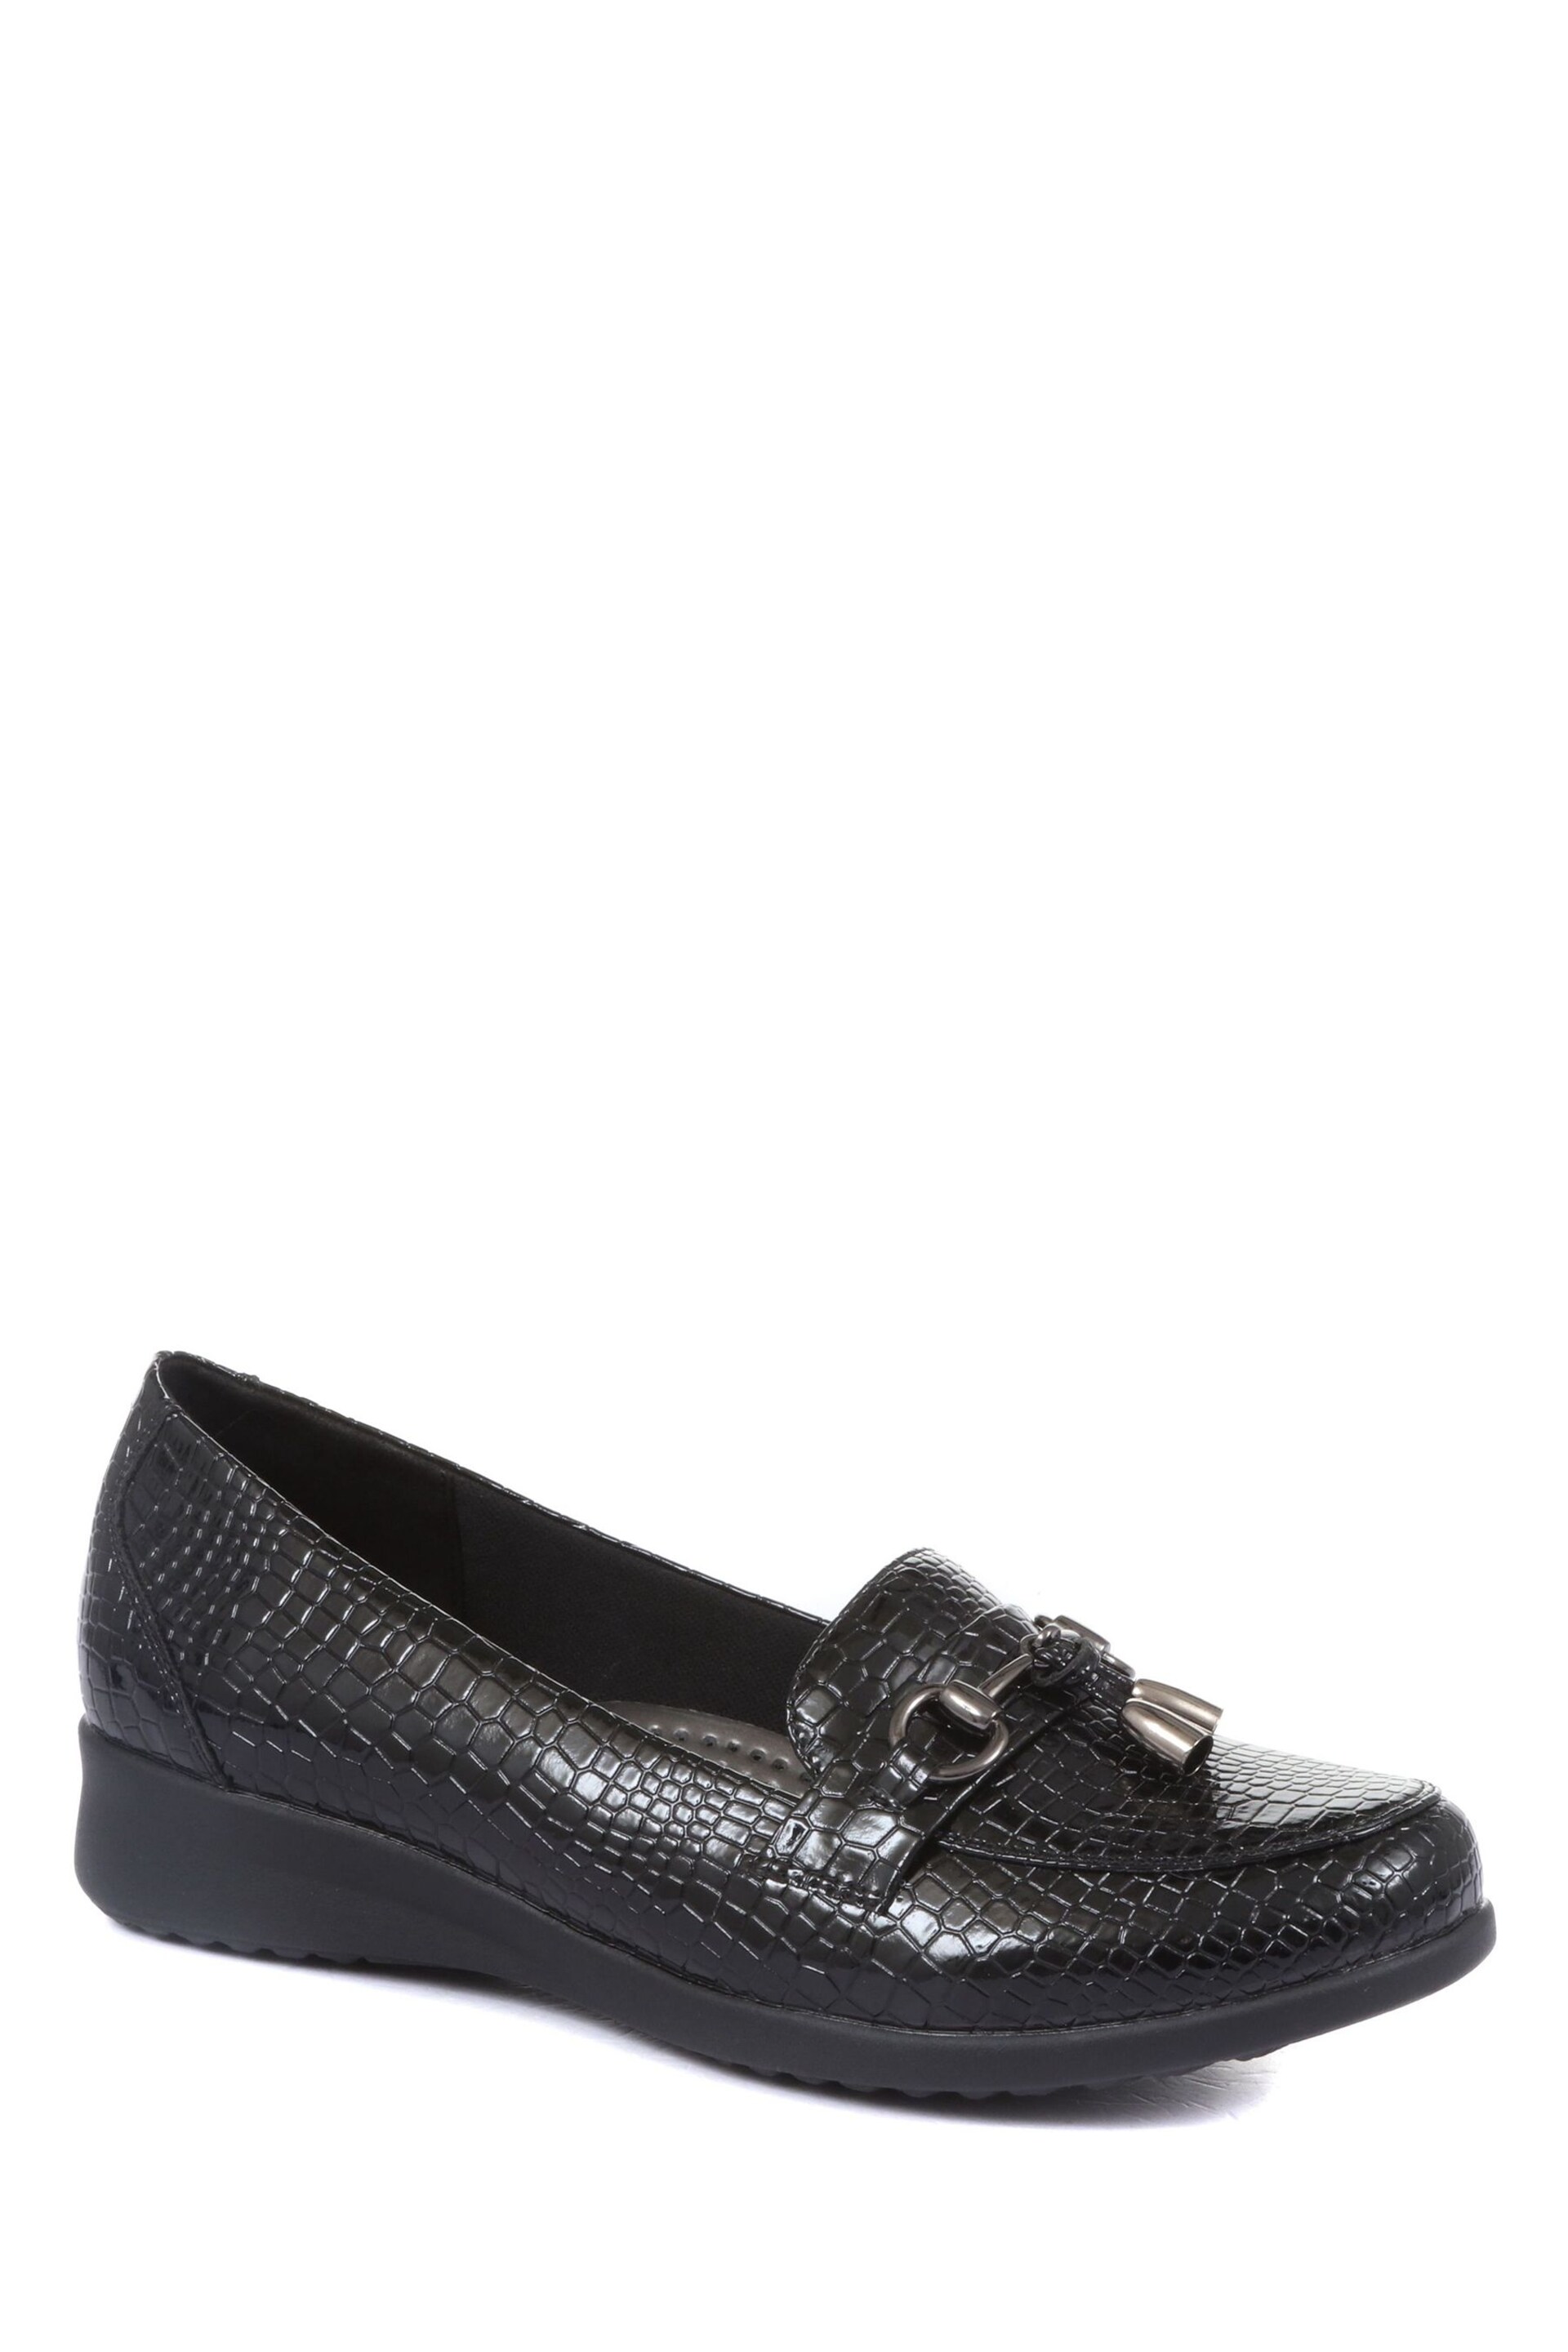 Pavers Patent Ladies Loafers - Image 3 of 5